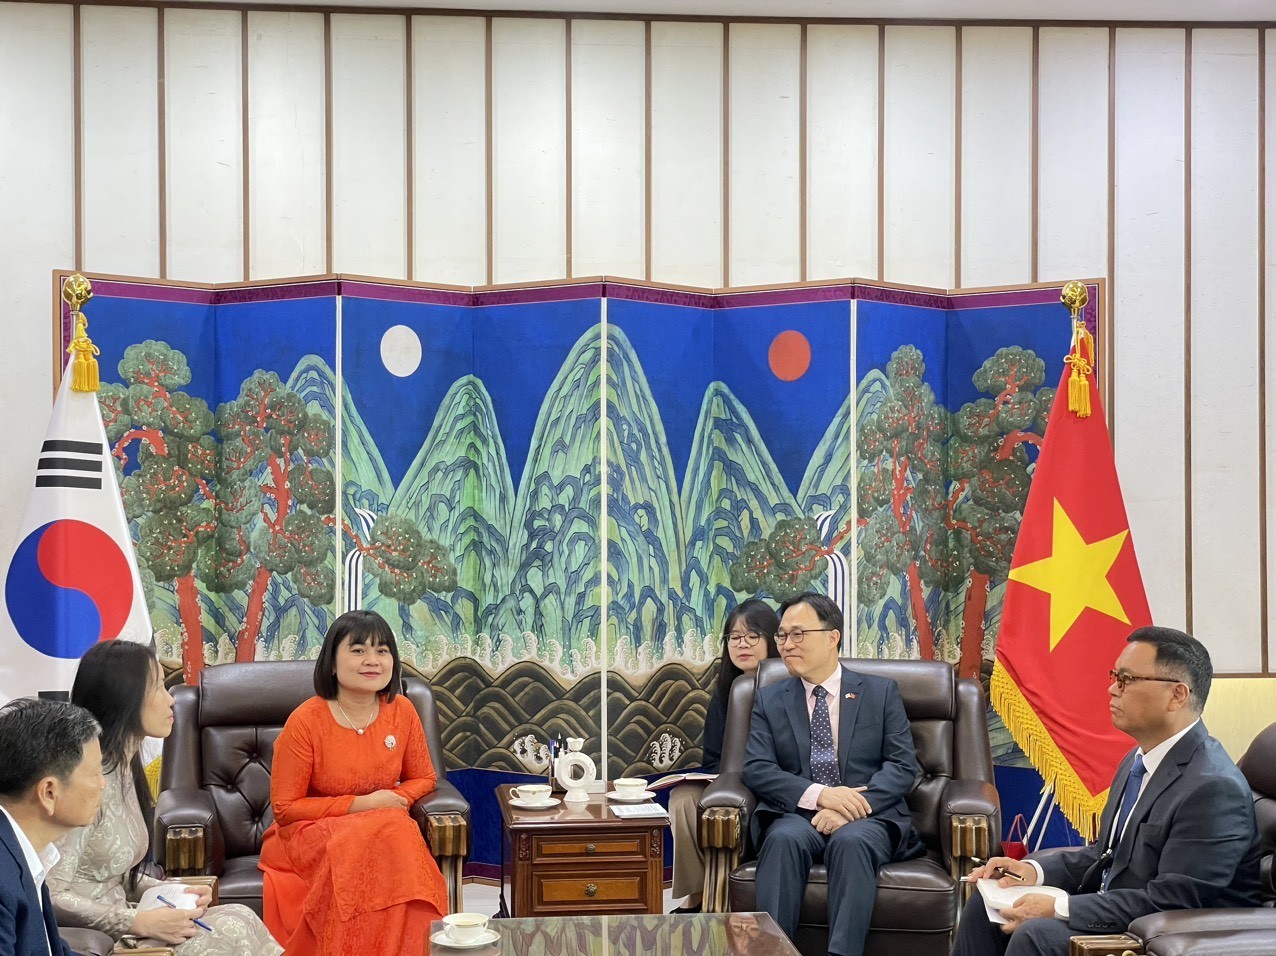 Dak Lak Province Promote Cooperation with Foreign Embassies, NGOs